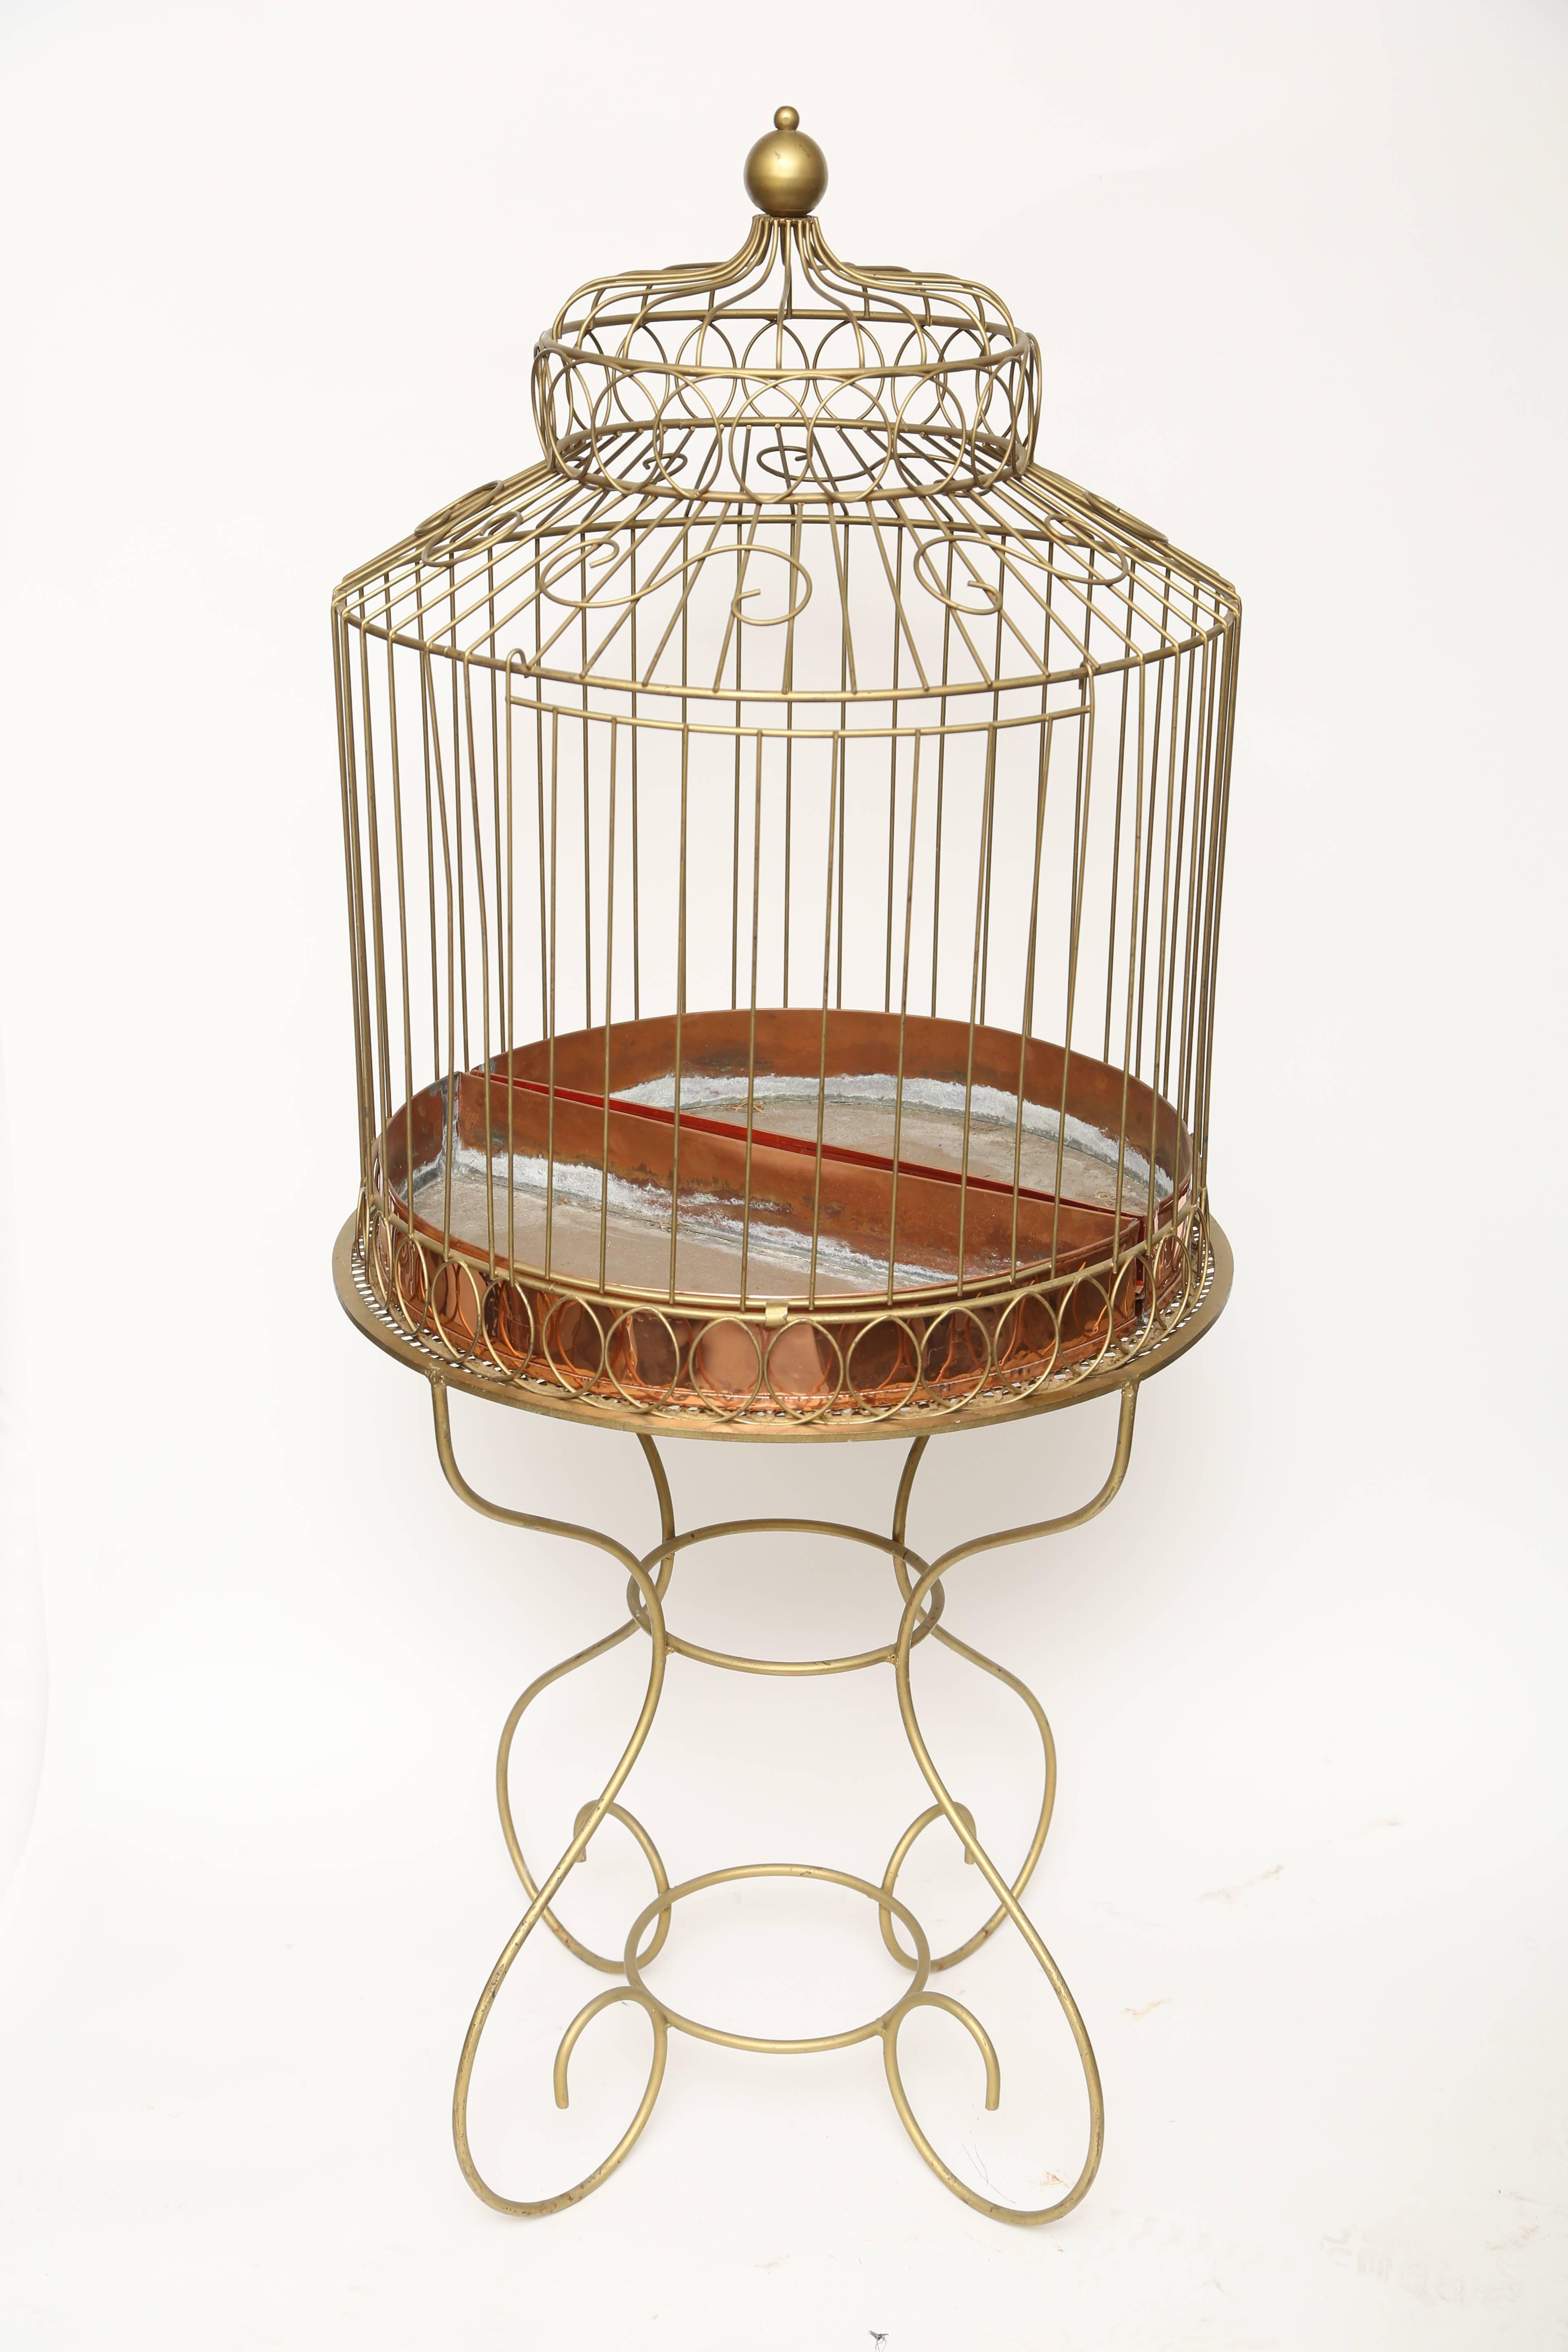 This large custom made two part bird cage has been made of gilt metal with two half round copper inserts to cover the bottom of the cage.. The cage itself has scrolled designs with a large door in the centre front. The base has a pierced top and